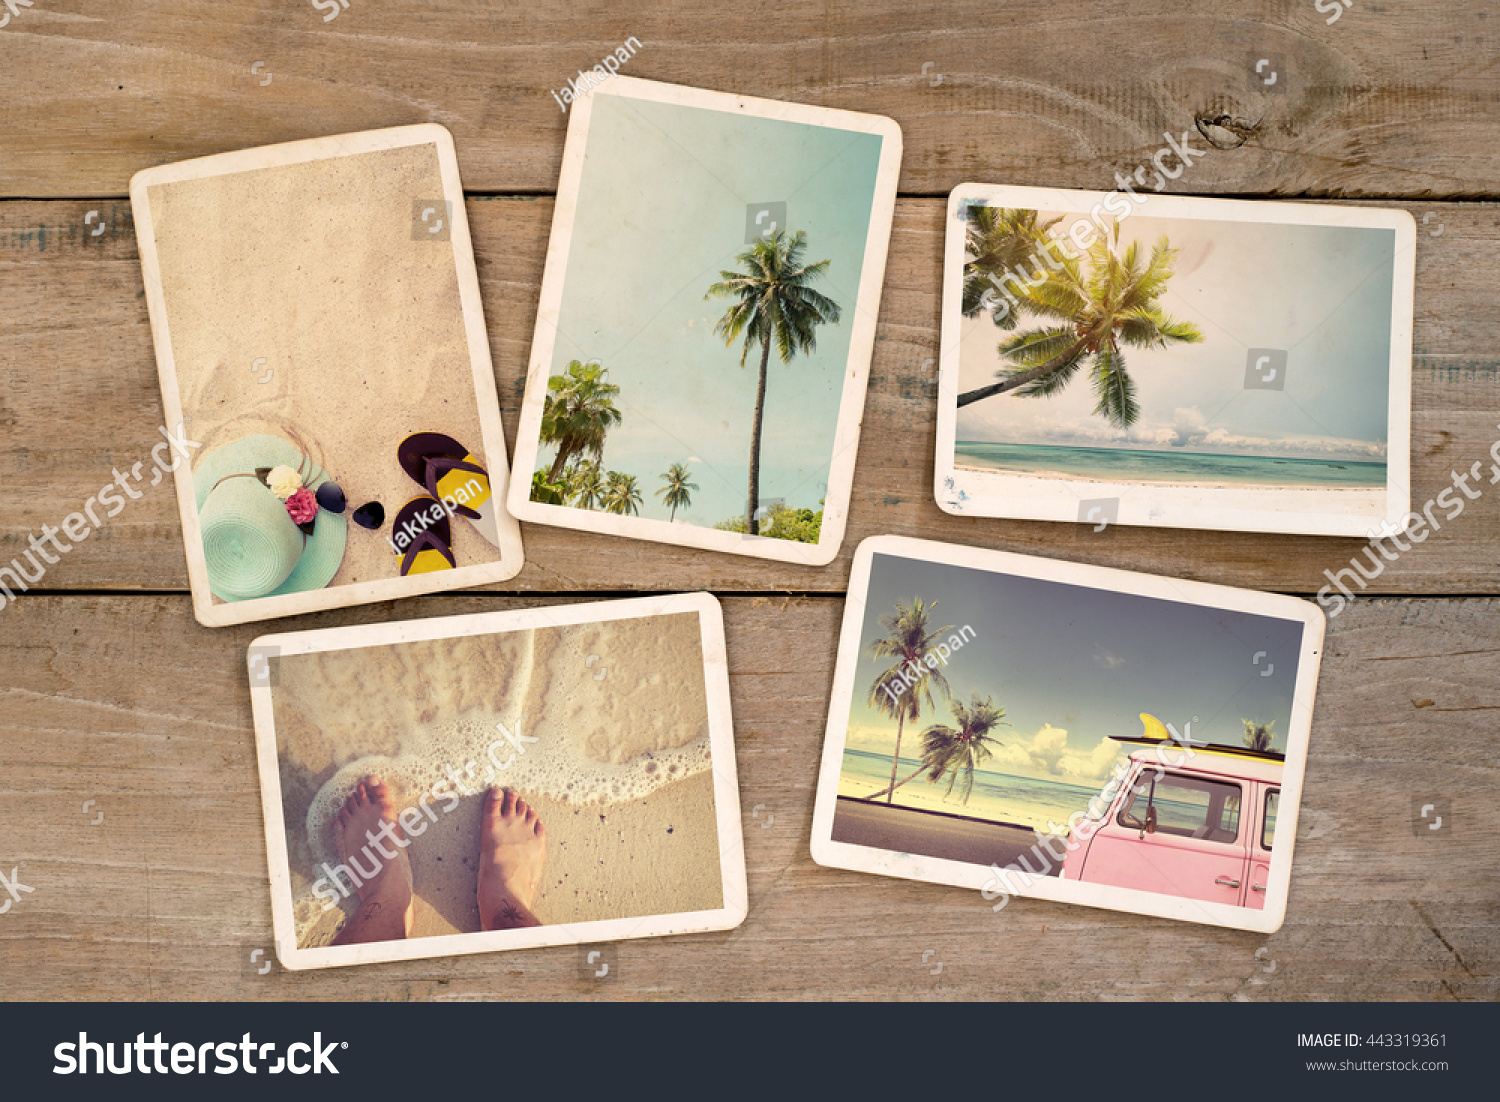 Photo album remembrance and nostalgia journey in summer surfing beach trip on wood table. instant photo of vintage camera - vintage and retro style #443319361